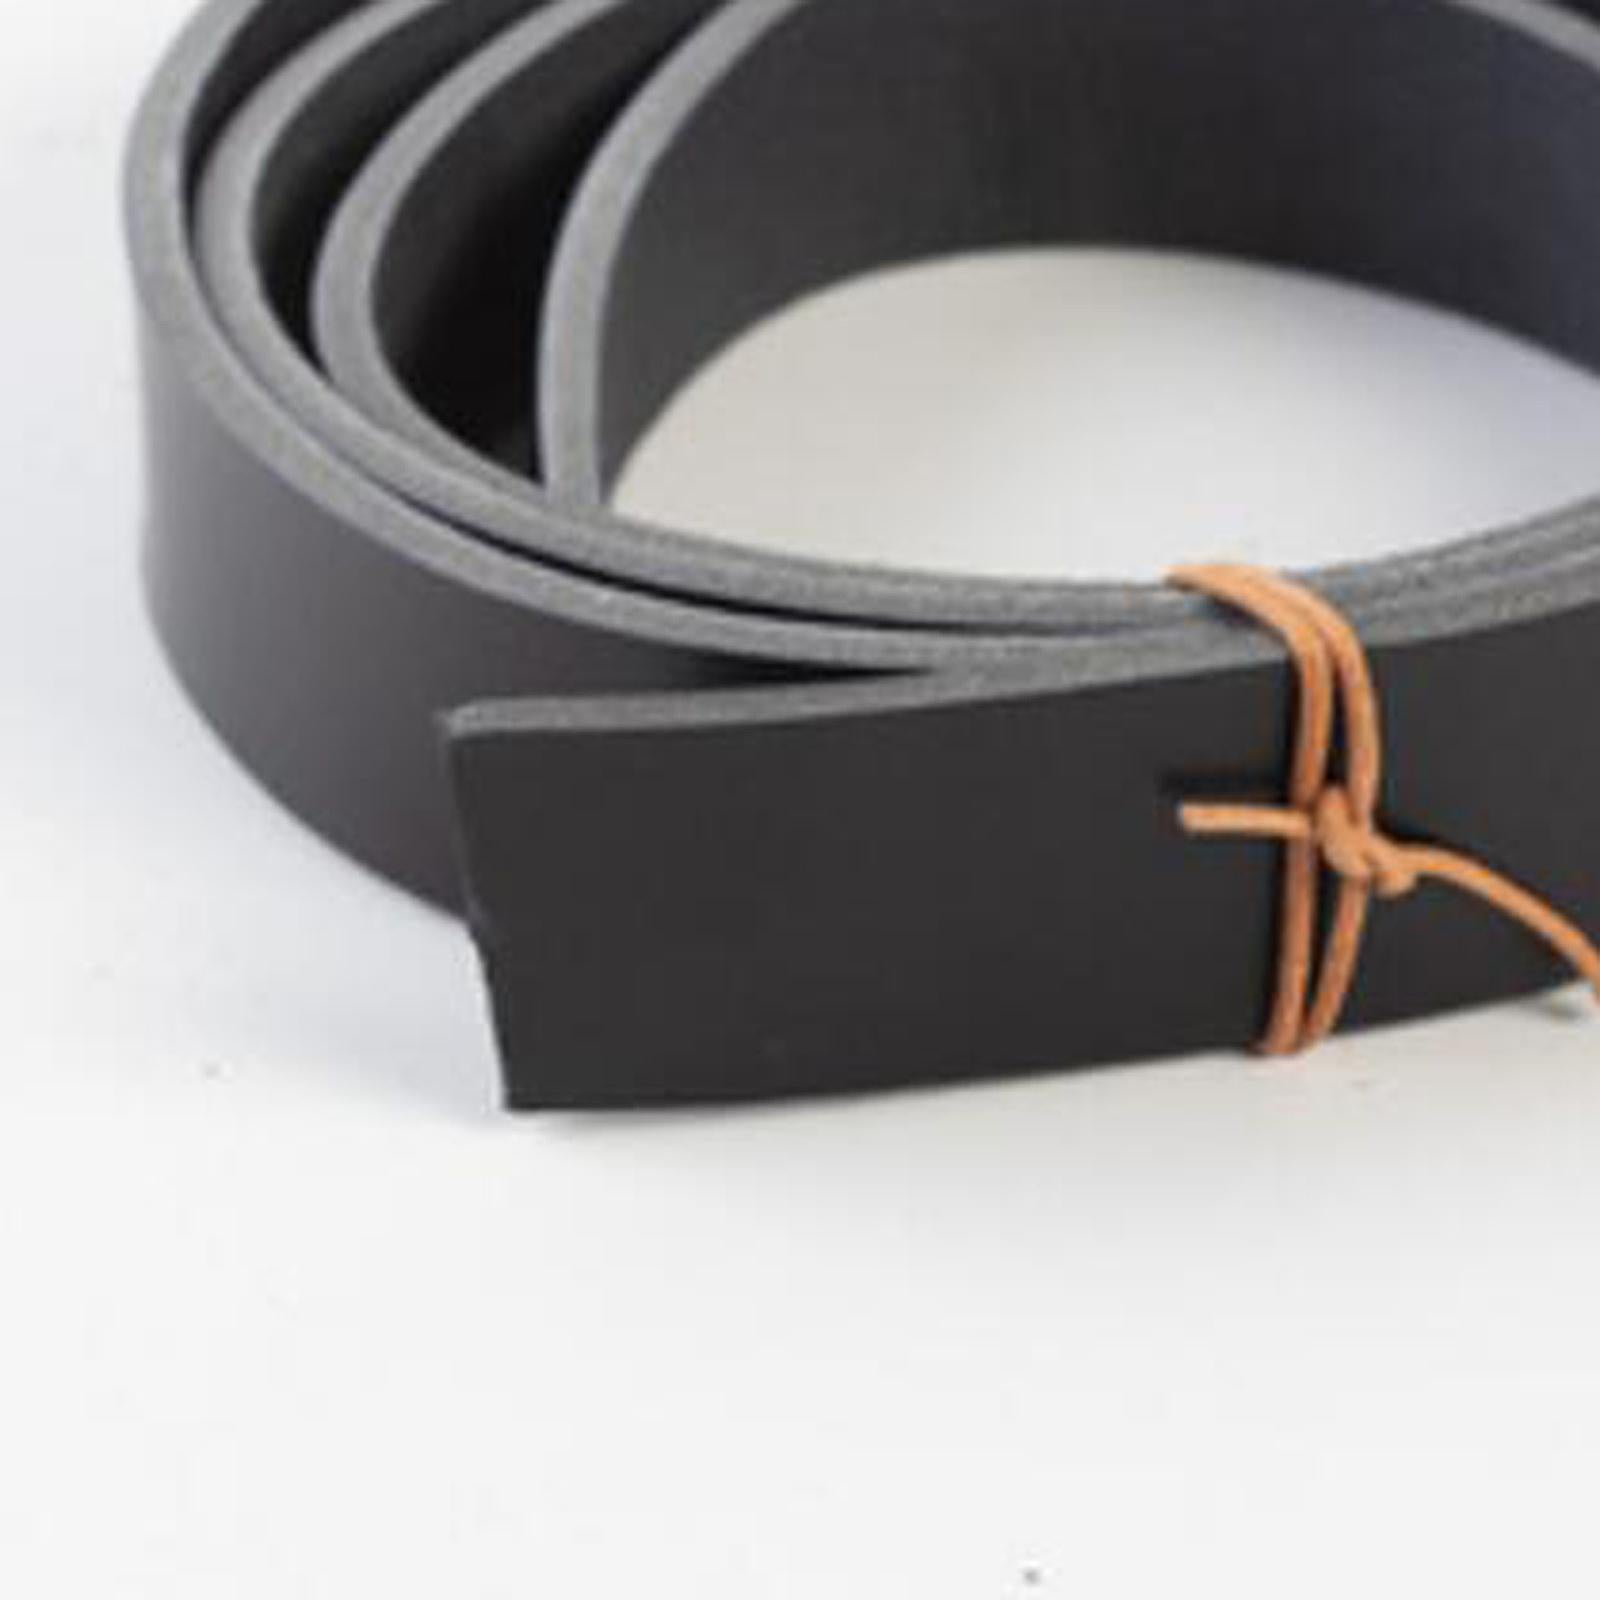 PU Leather Strips Pets Collars 2x80cm Straps Crafting Sewing Keychain Belt Black